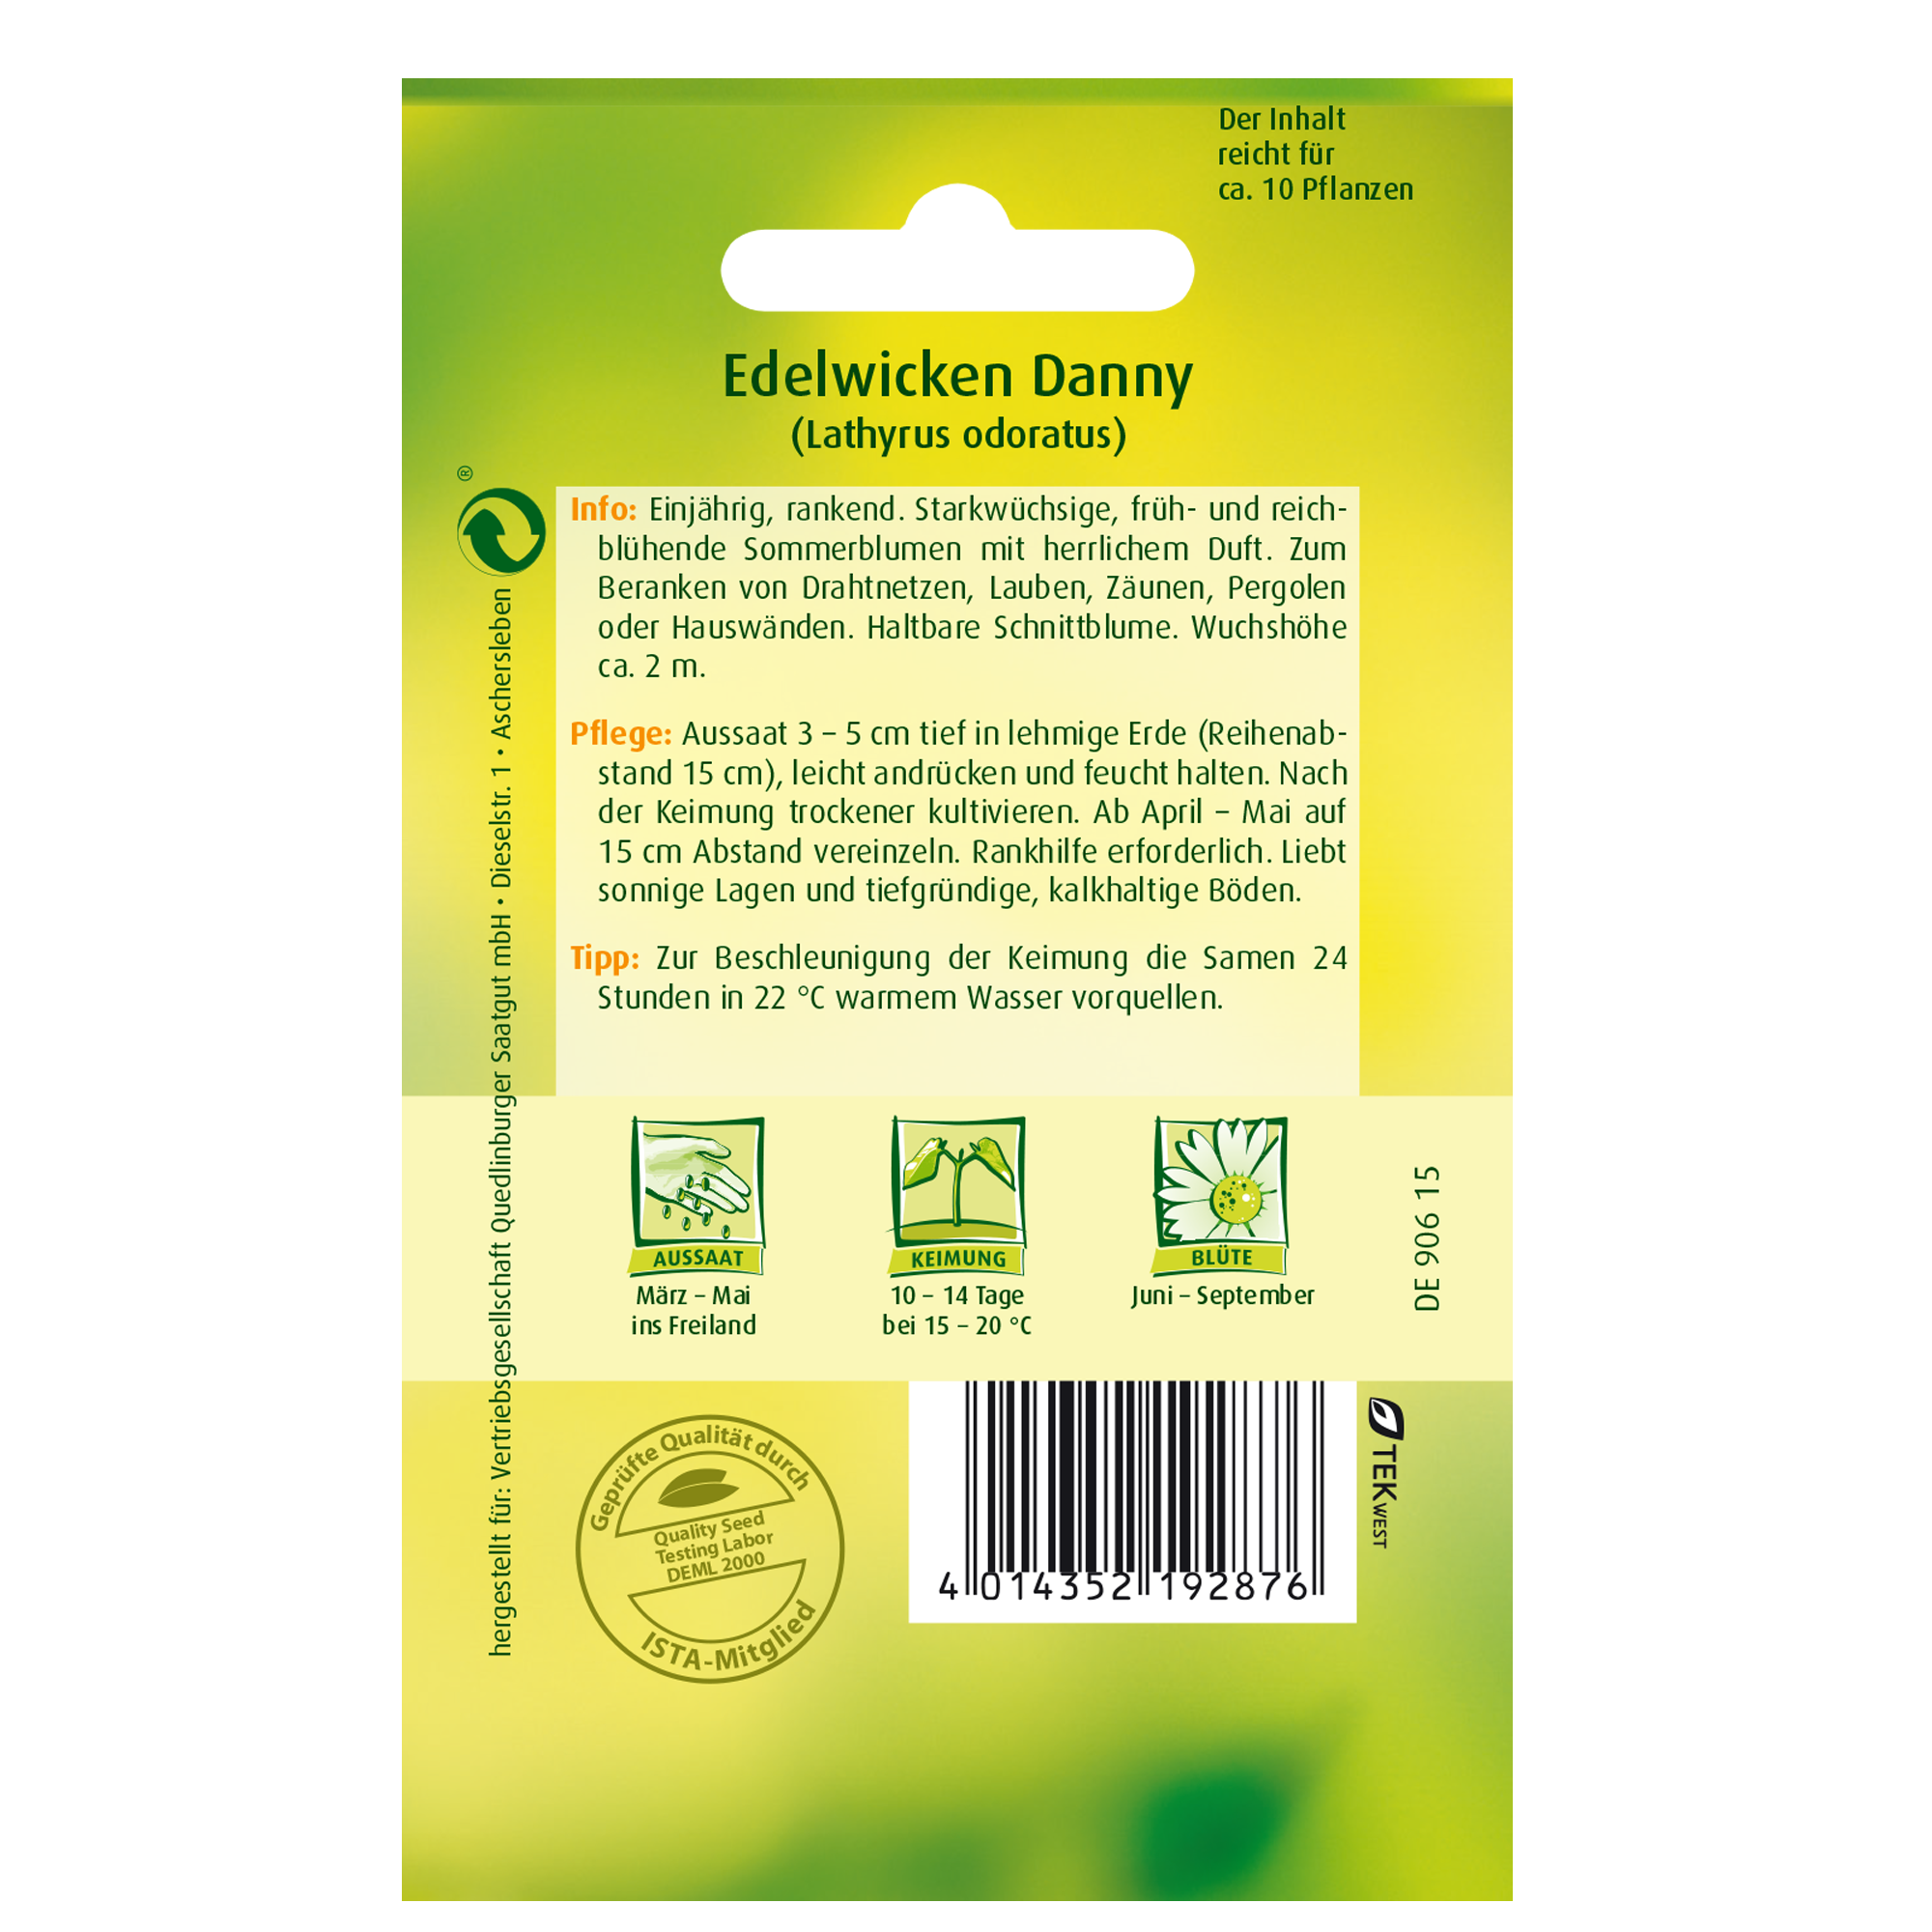 Edelwicken 'Danny' + product picture